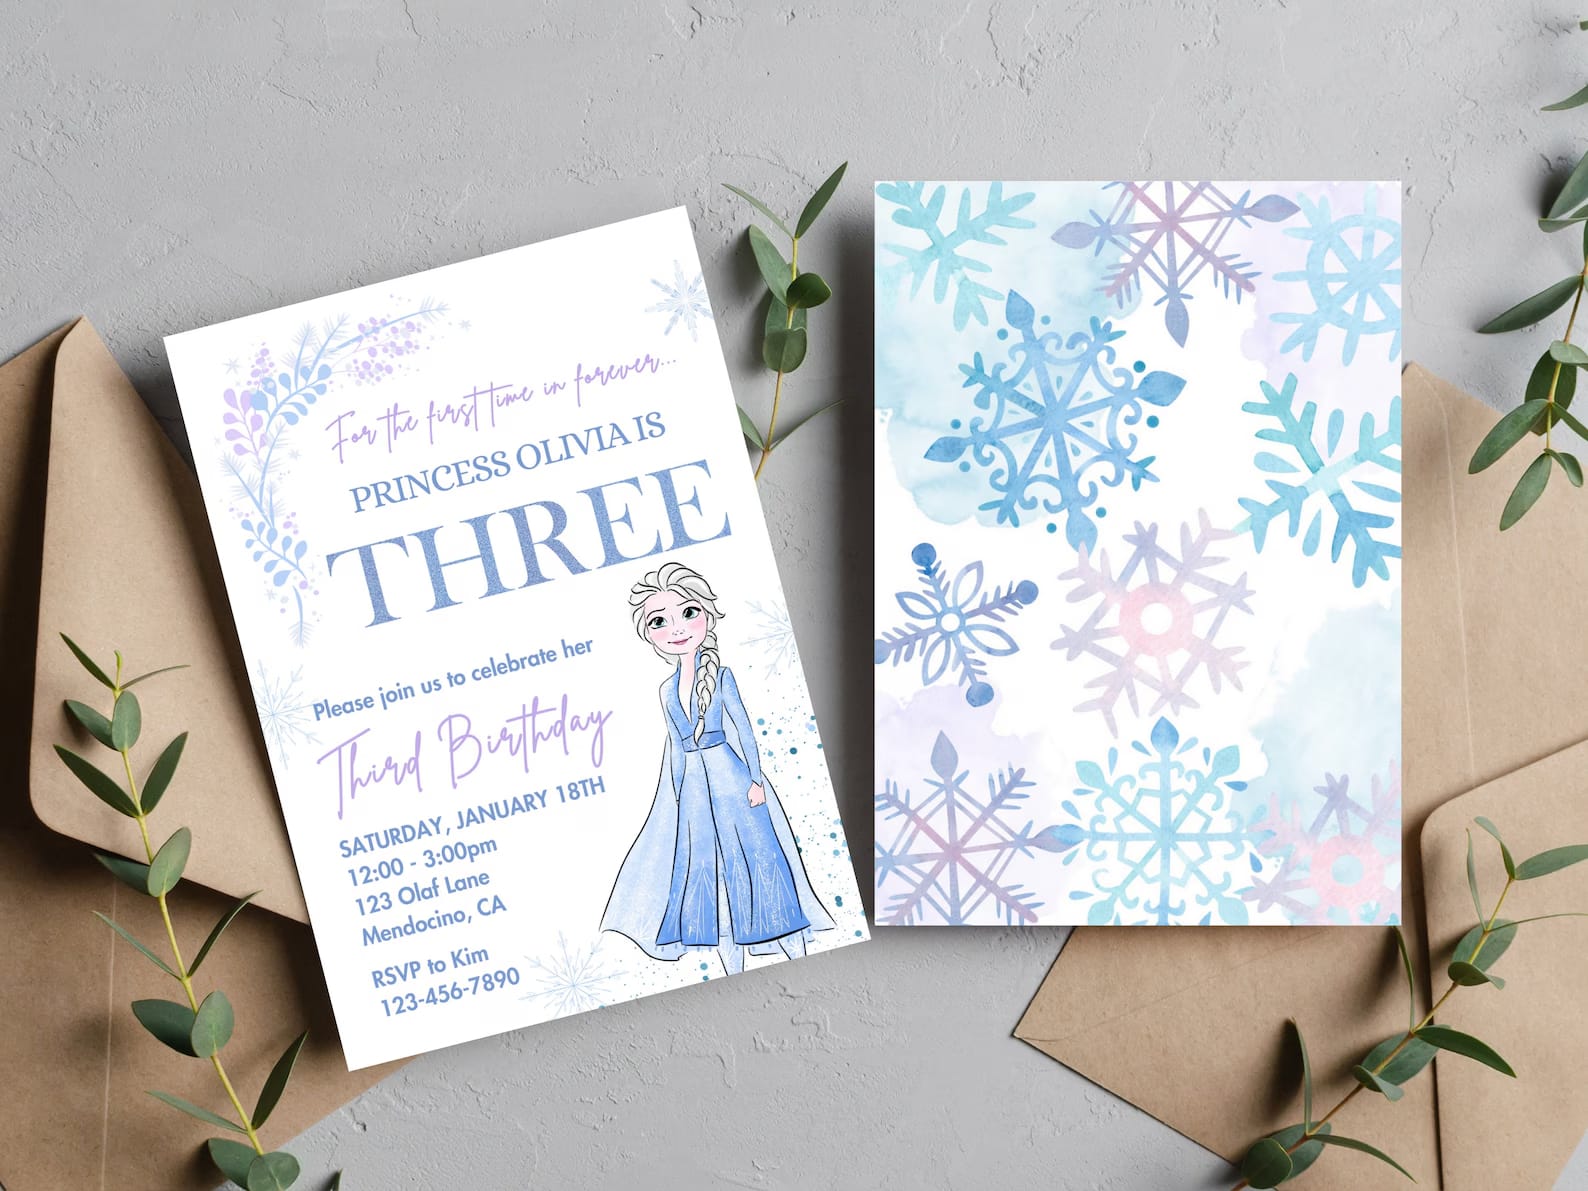 Frozen invitation for a three year old's birthday party